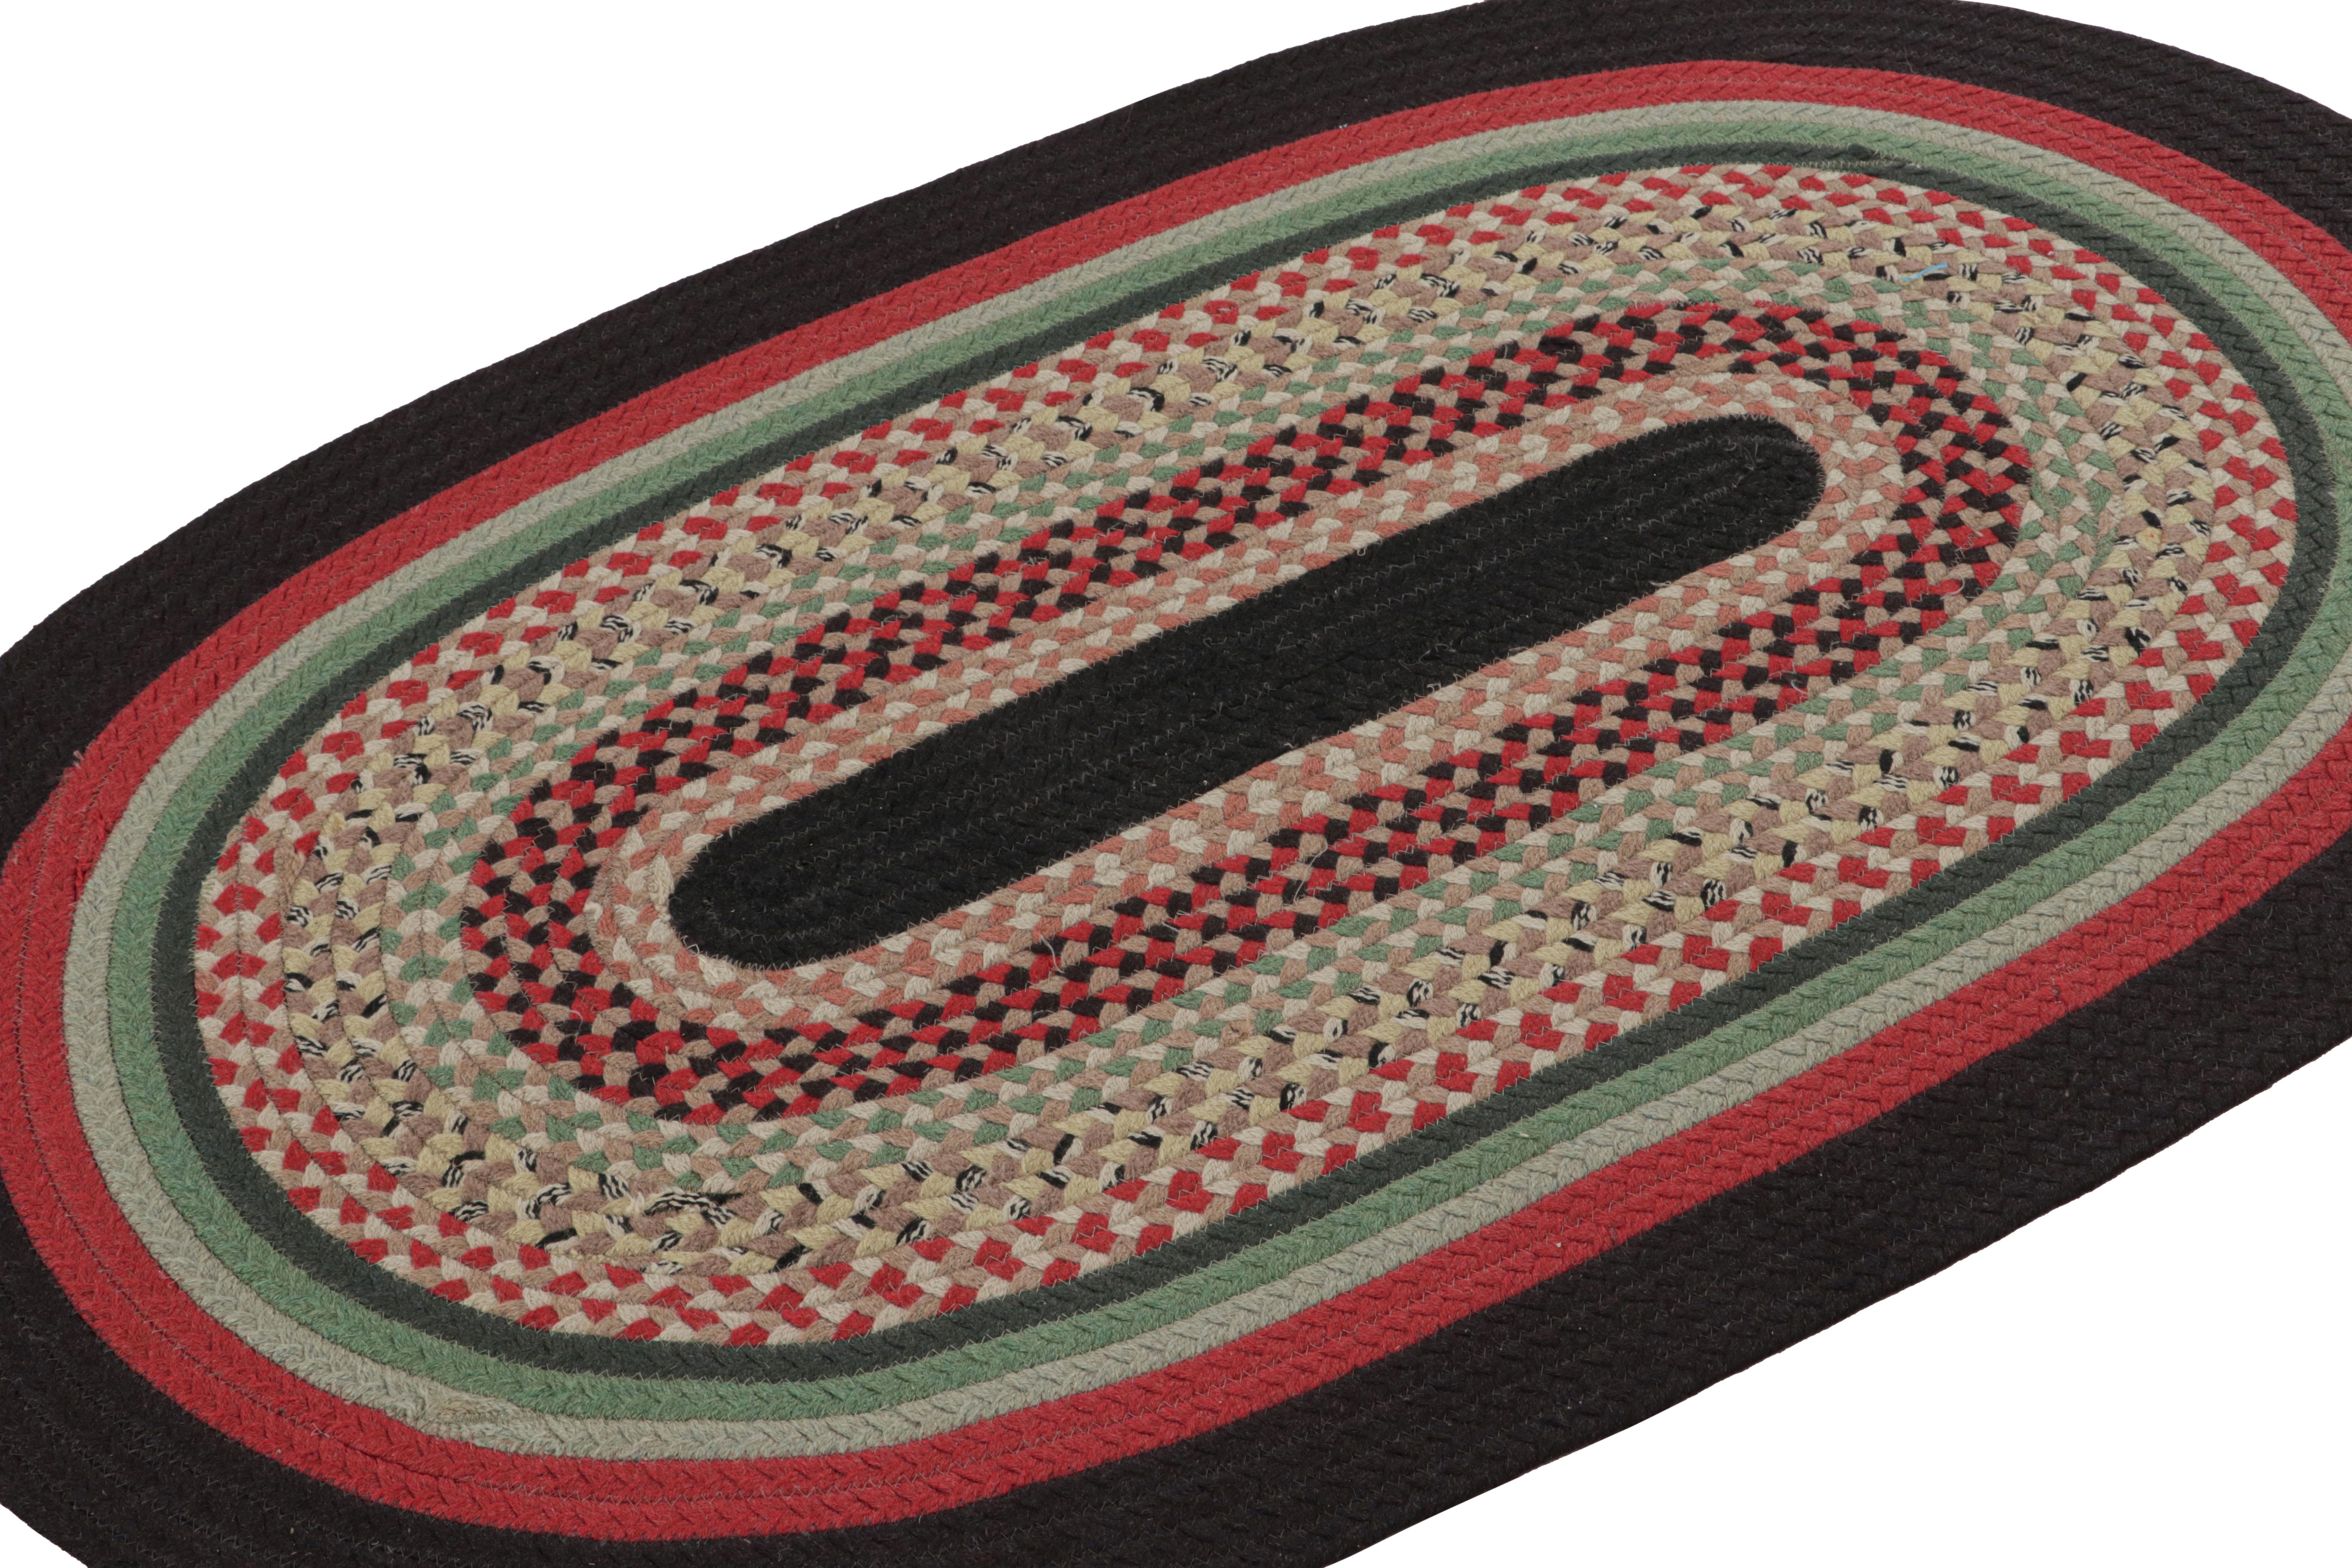 A rare 3x5 antique hooked oval rug of United States’ provenance, handmade in braided wool and fabric circa 1920-1930 with polychromatic stripes in a braided style. 

On the Design: 

Admirers of the craft will note the intricate pattern and color